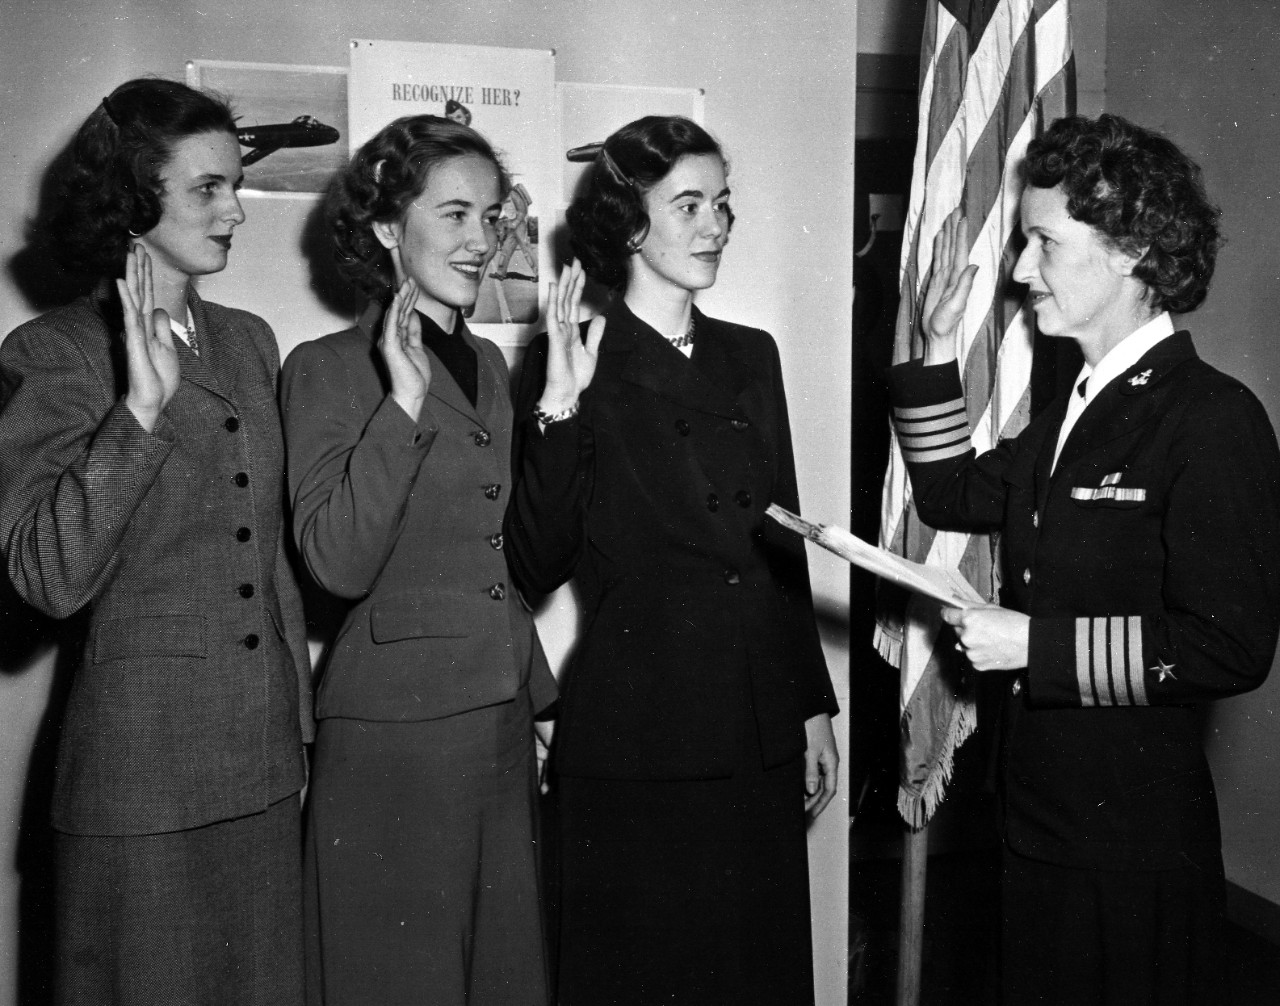 Three women in civilian clothing hold up their right hands facing a woman in uniform.